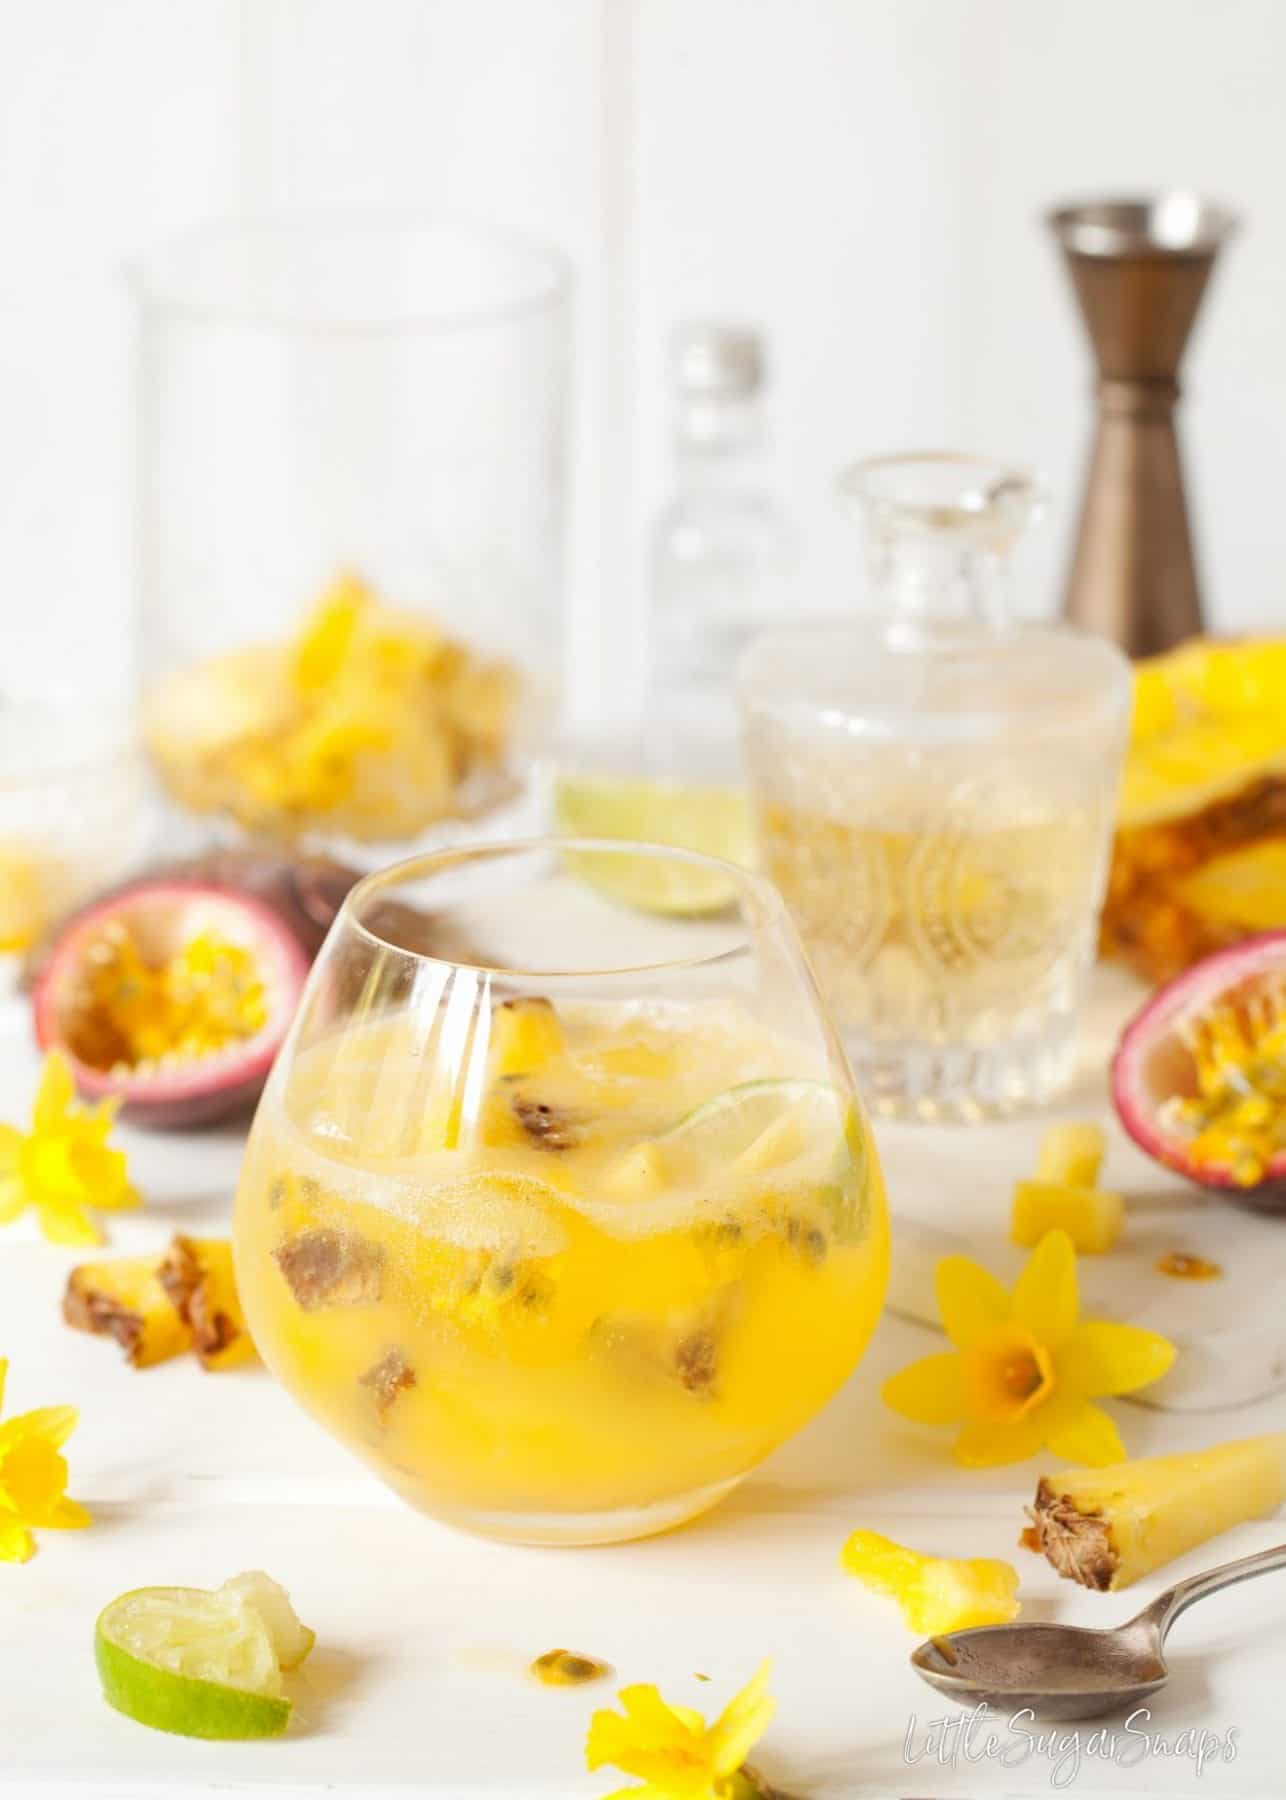 Passionfruit and Pineapple Spring Gin & Tonic in a glass.